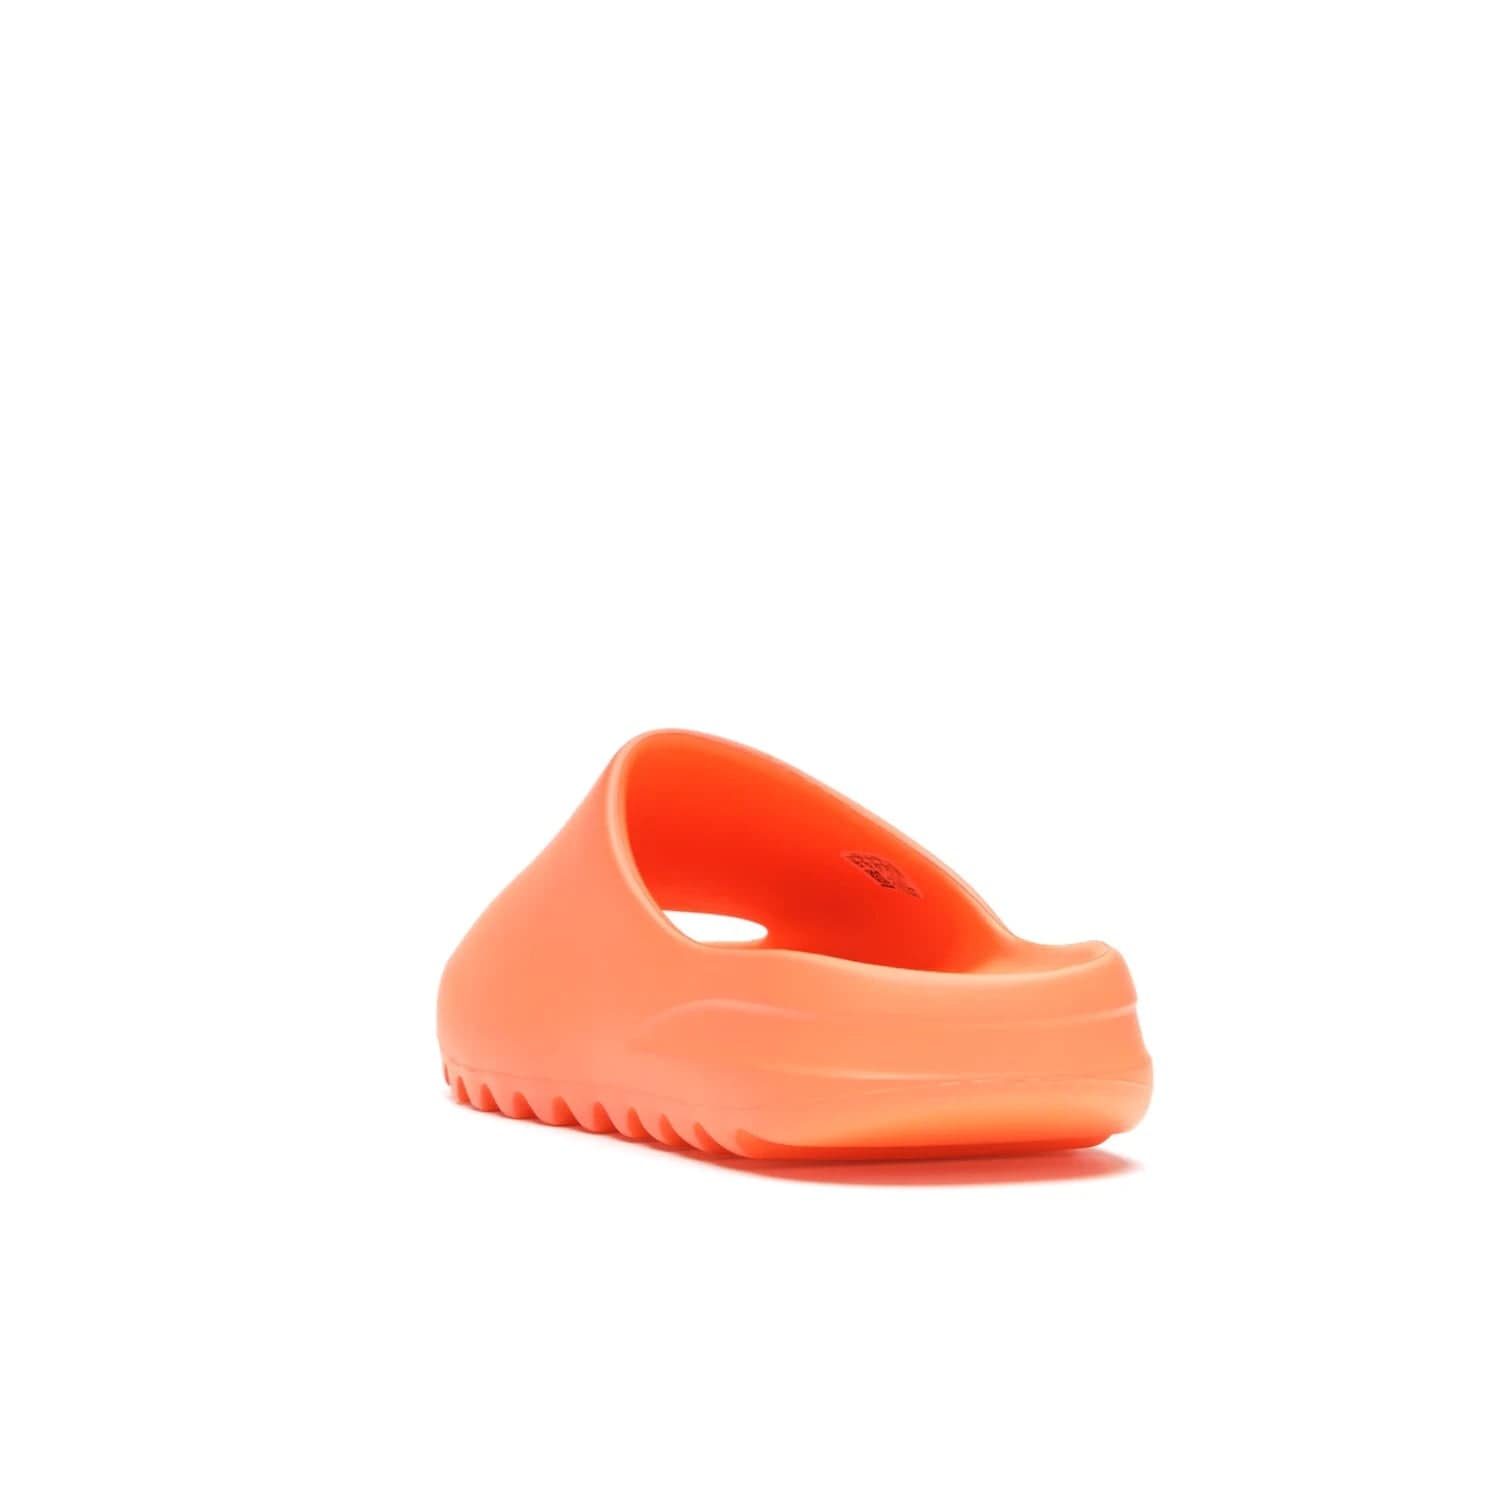 adidas Yeezy Slide Enflame Orange - Image 26 - Only at www.BallersClubKickz.com - Limited edition adidas Yeezy Slide featuring a bold Enflame Orange upper and EVA foam construction. Grooved outsole for traction and support. Released June 2021. Perfect for summer.